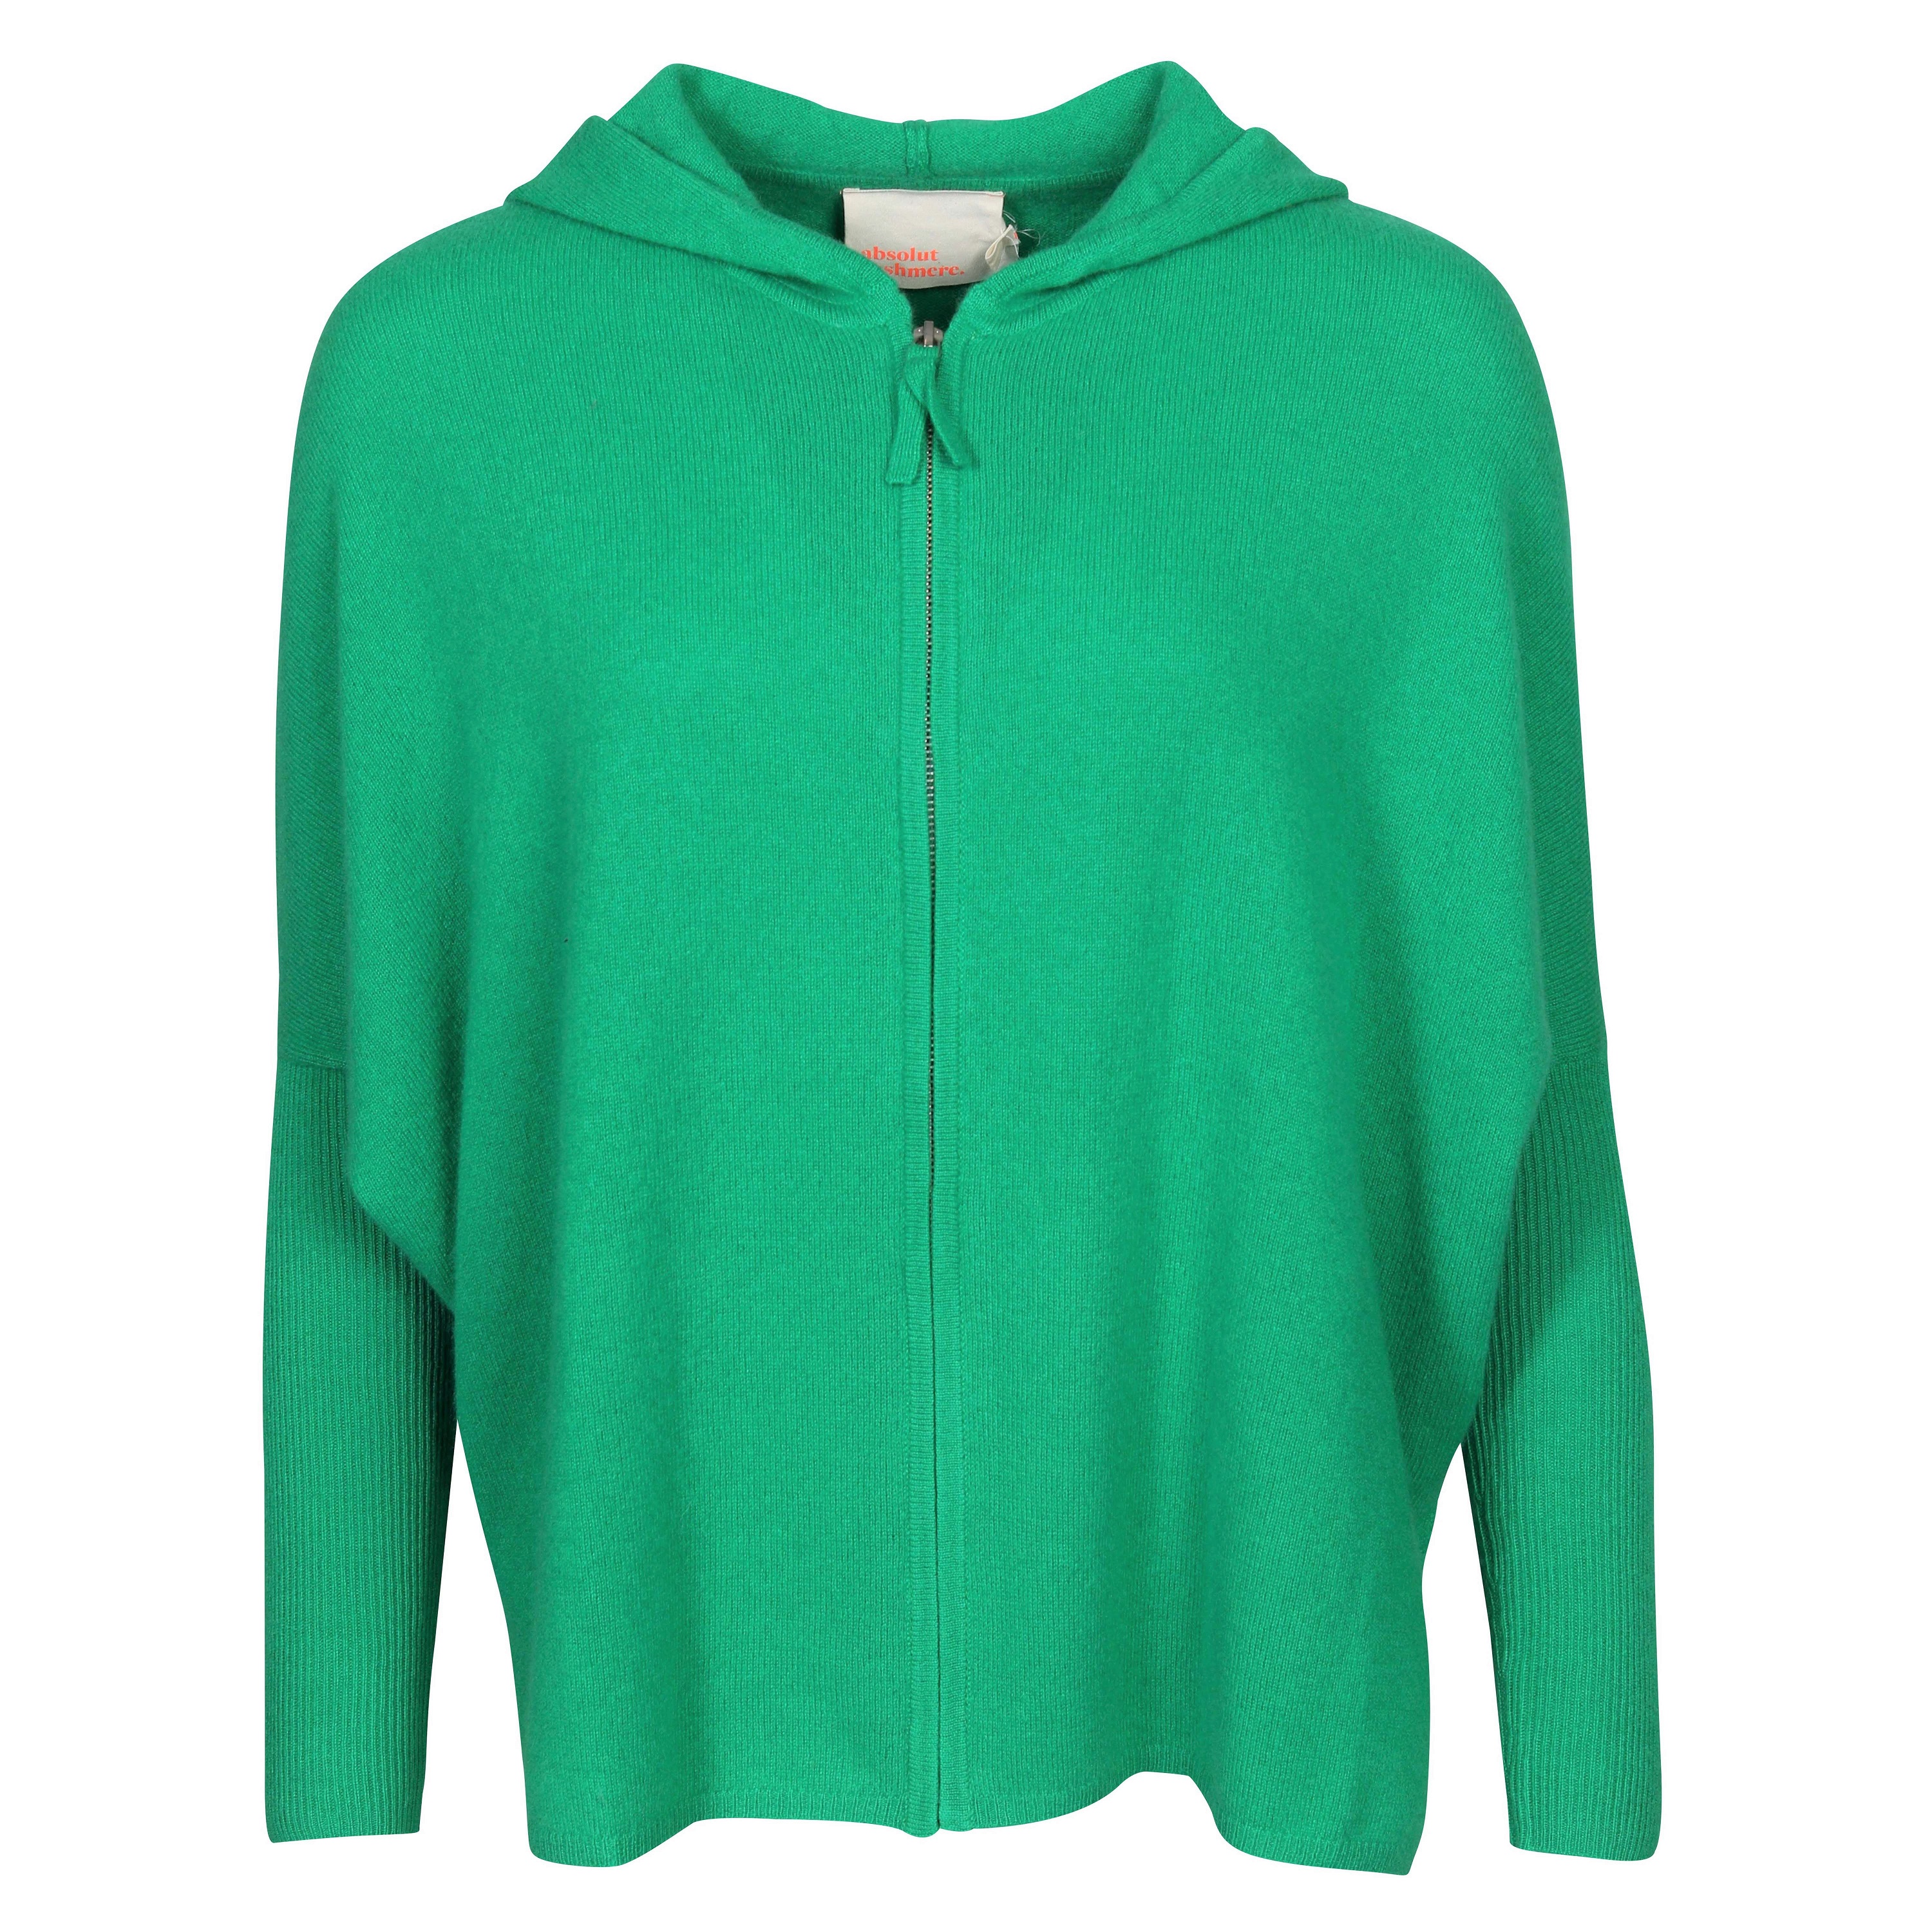 Absolut Cashmere Lilly Zip Hoodie in Imperial